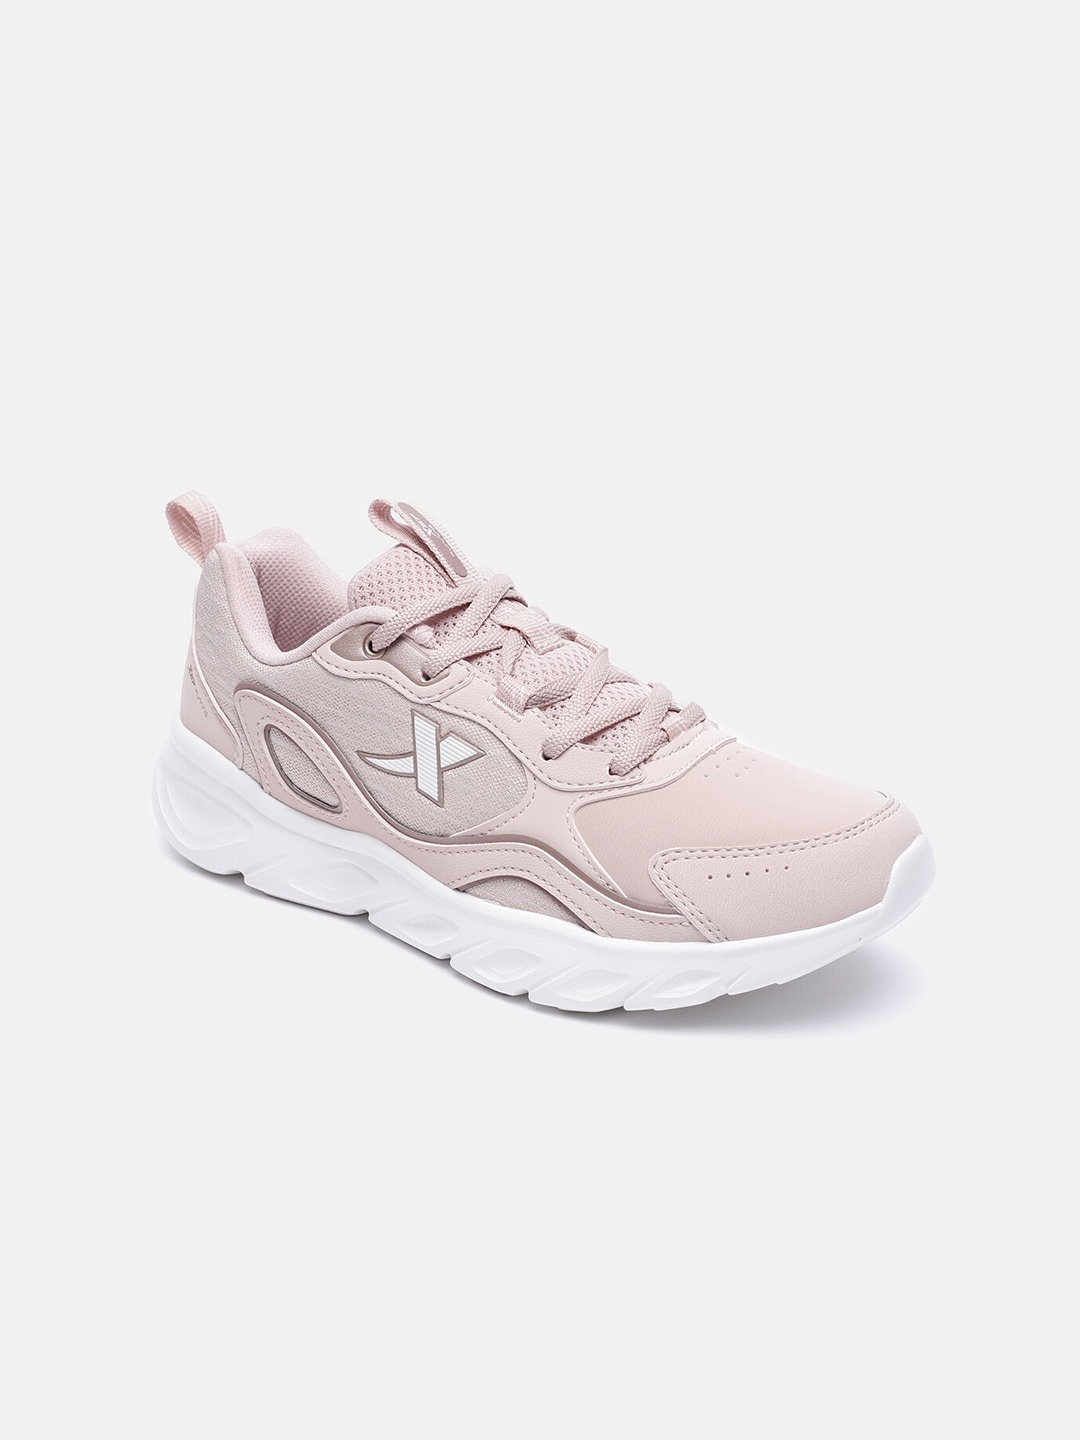 Xtep Women Pink Textile Running Non-Marking Shoes Price in India